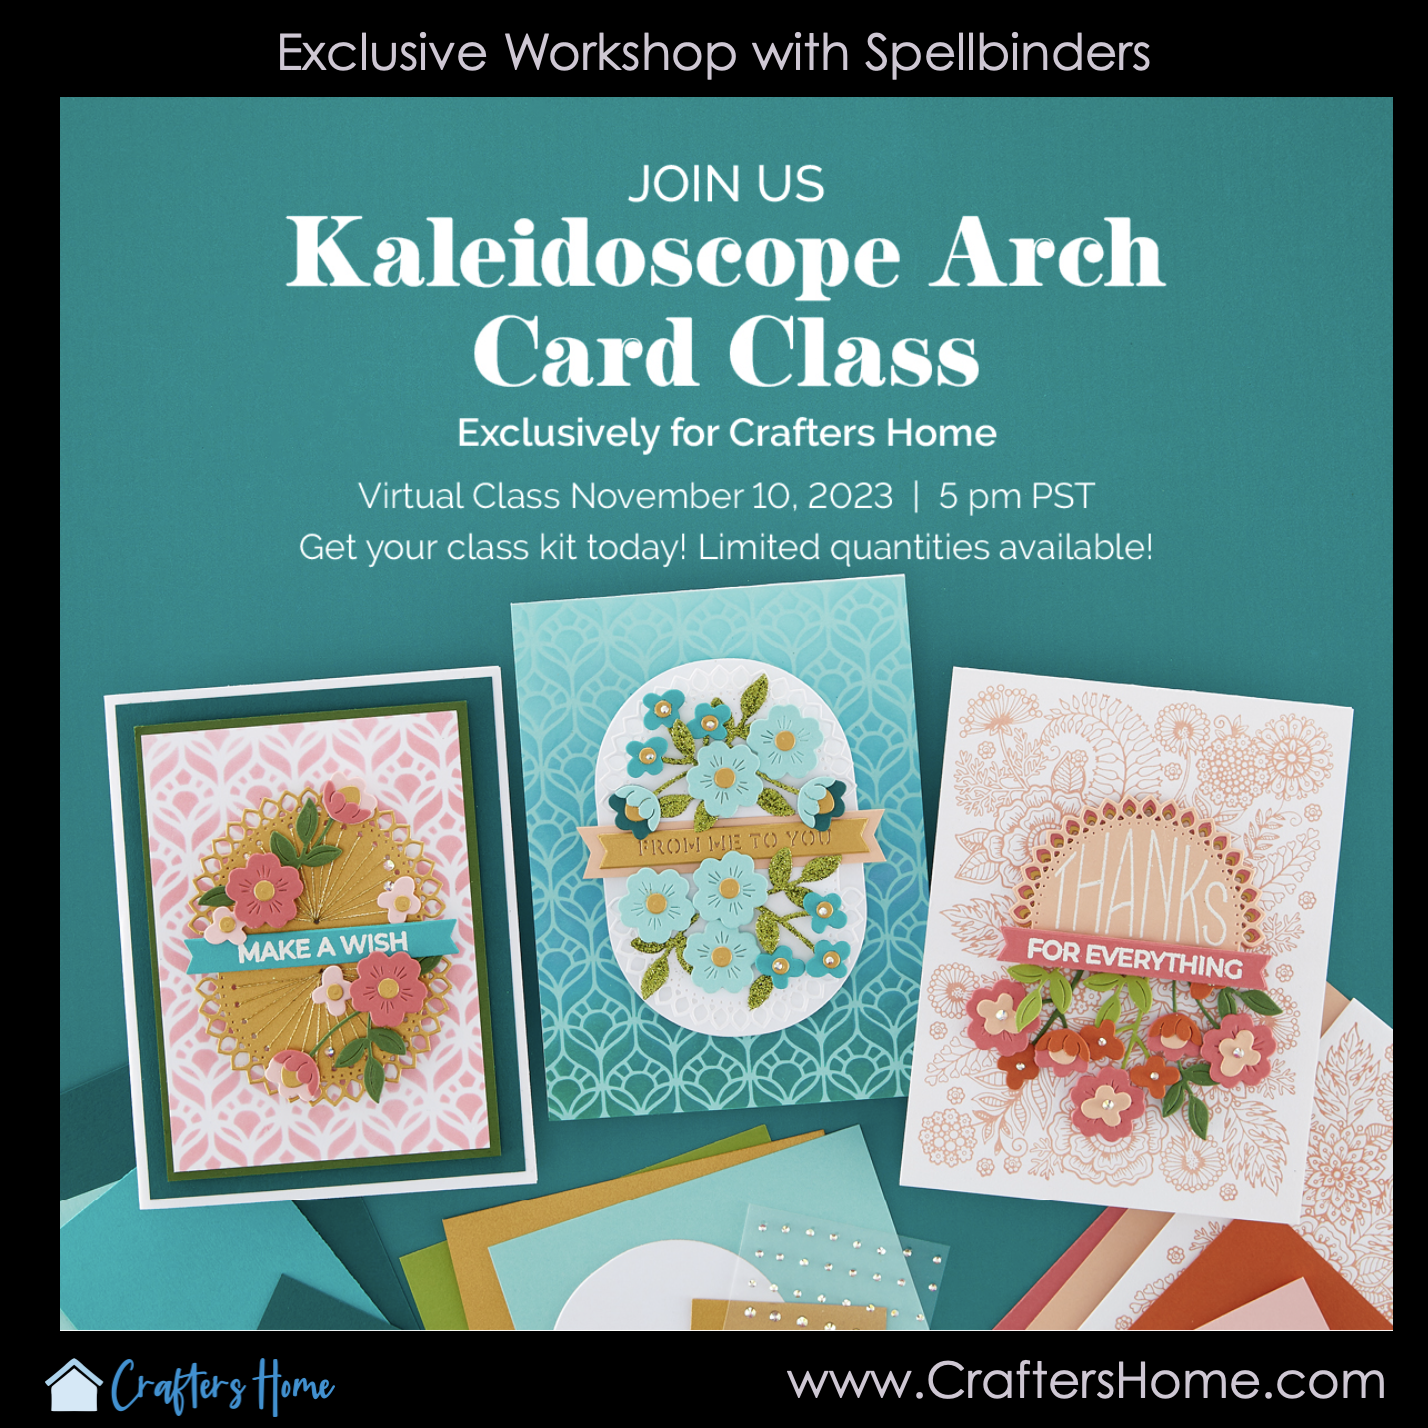 Kaleidoscope Arch Card Class $56.00--SOLD OUT